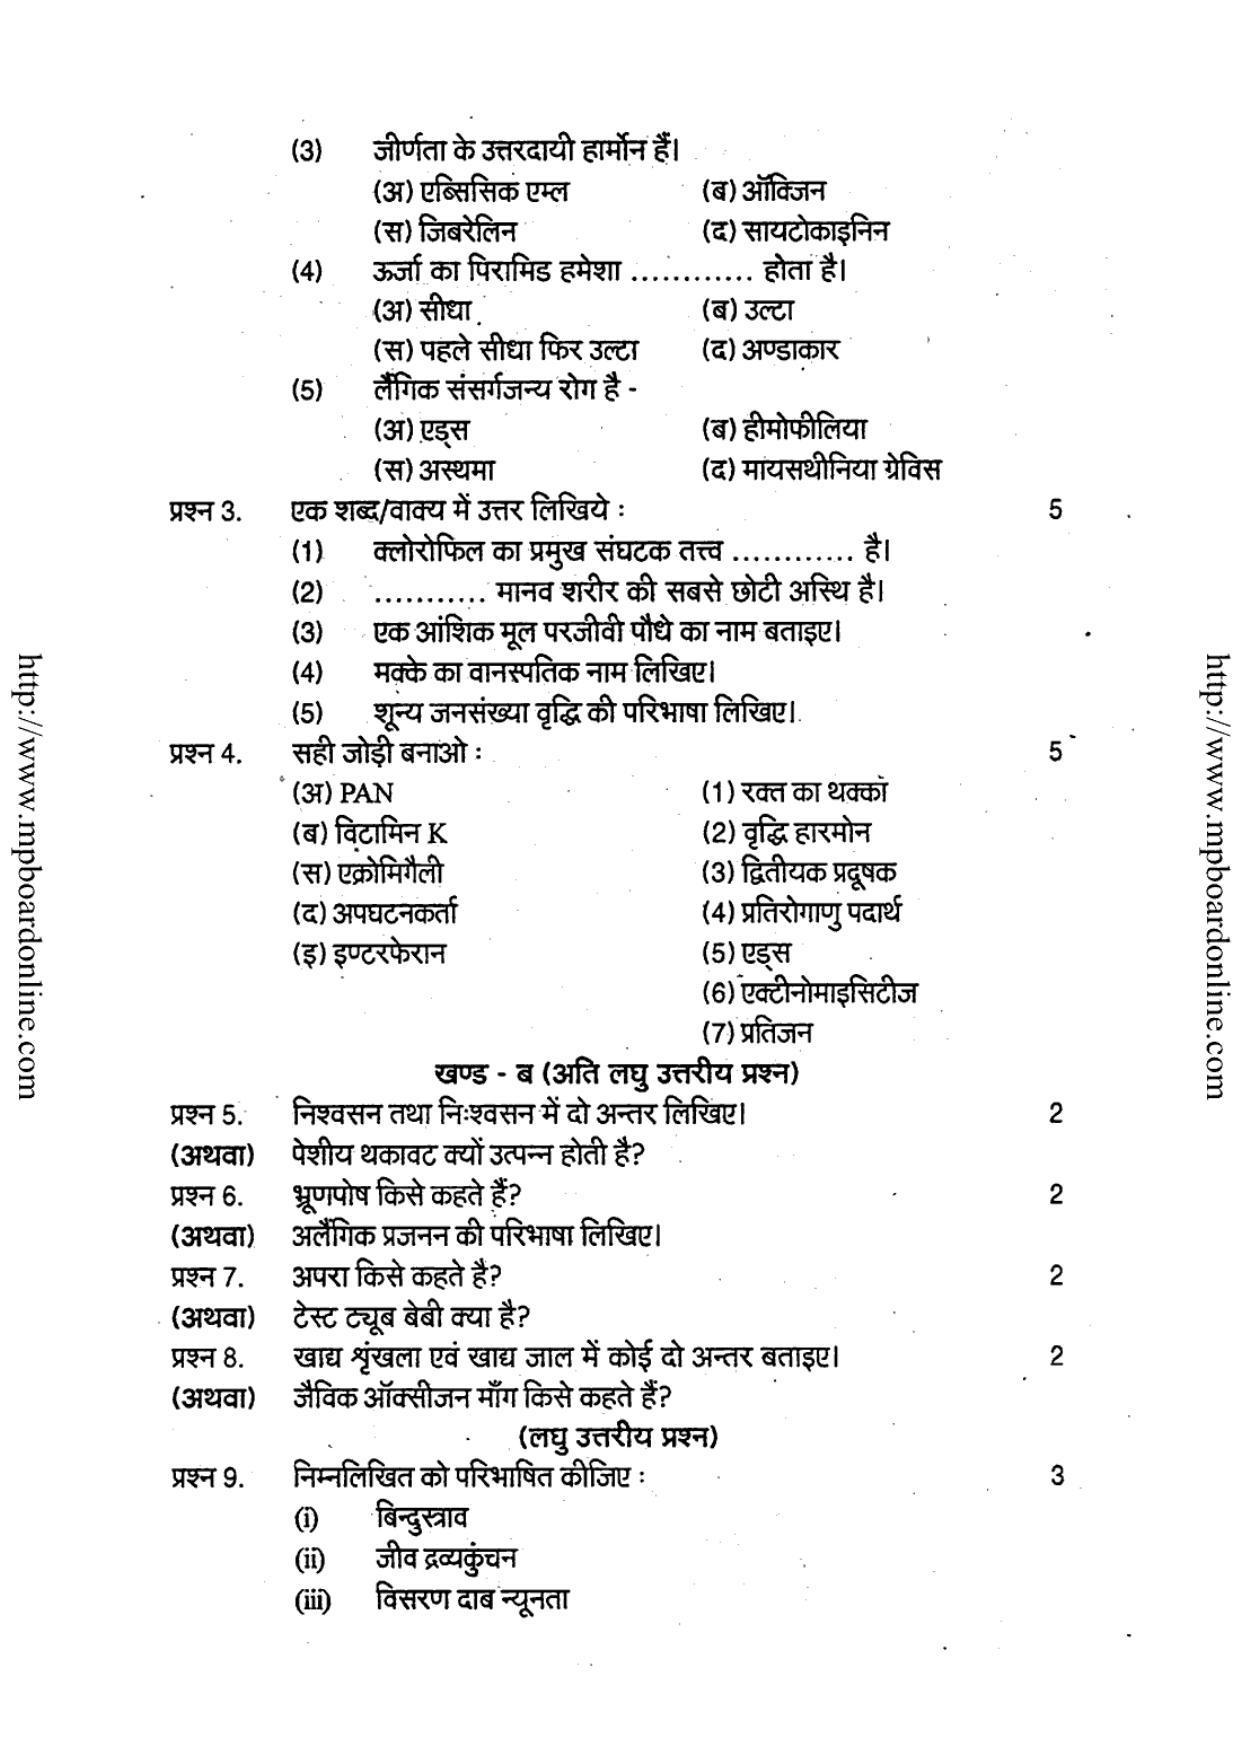 MP Board Class 12 Biology 2018 Question Paper - Page 2